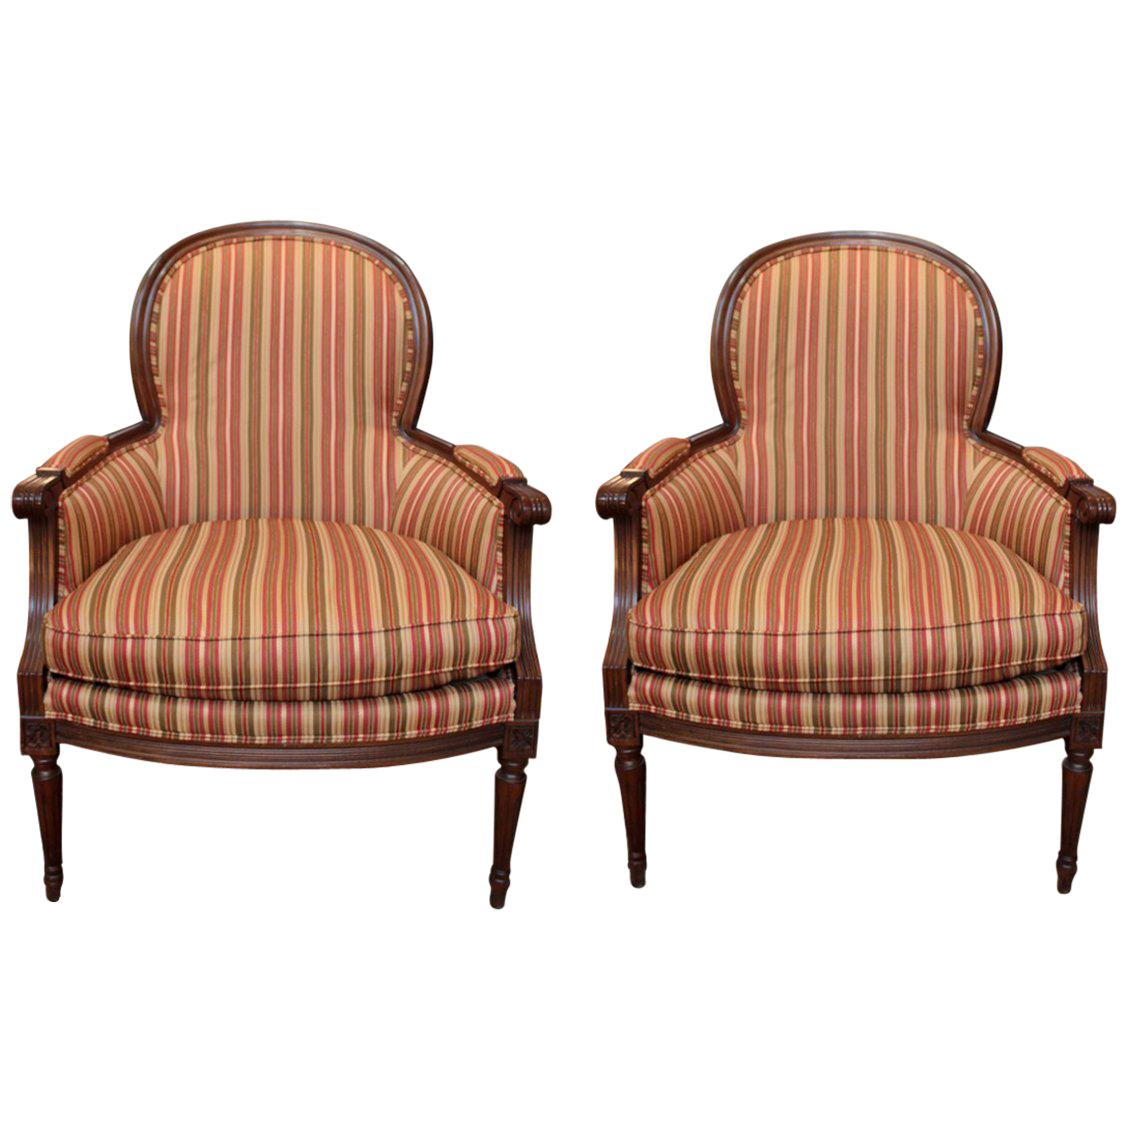 Pair of Carved Walnut Bergère Chairs